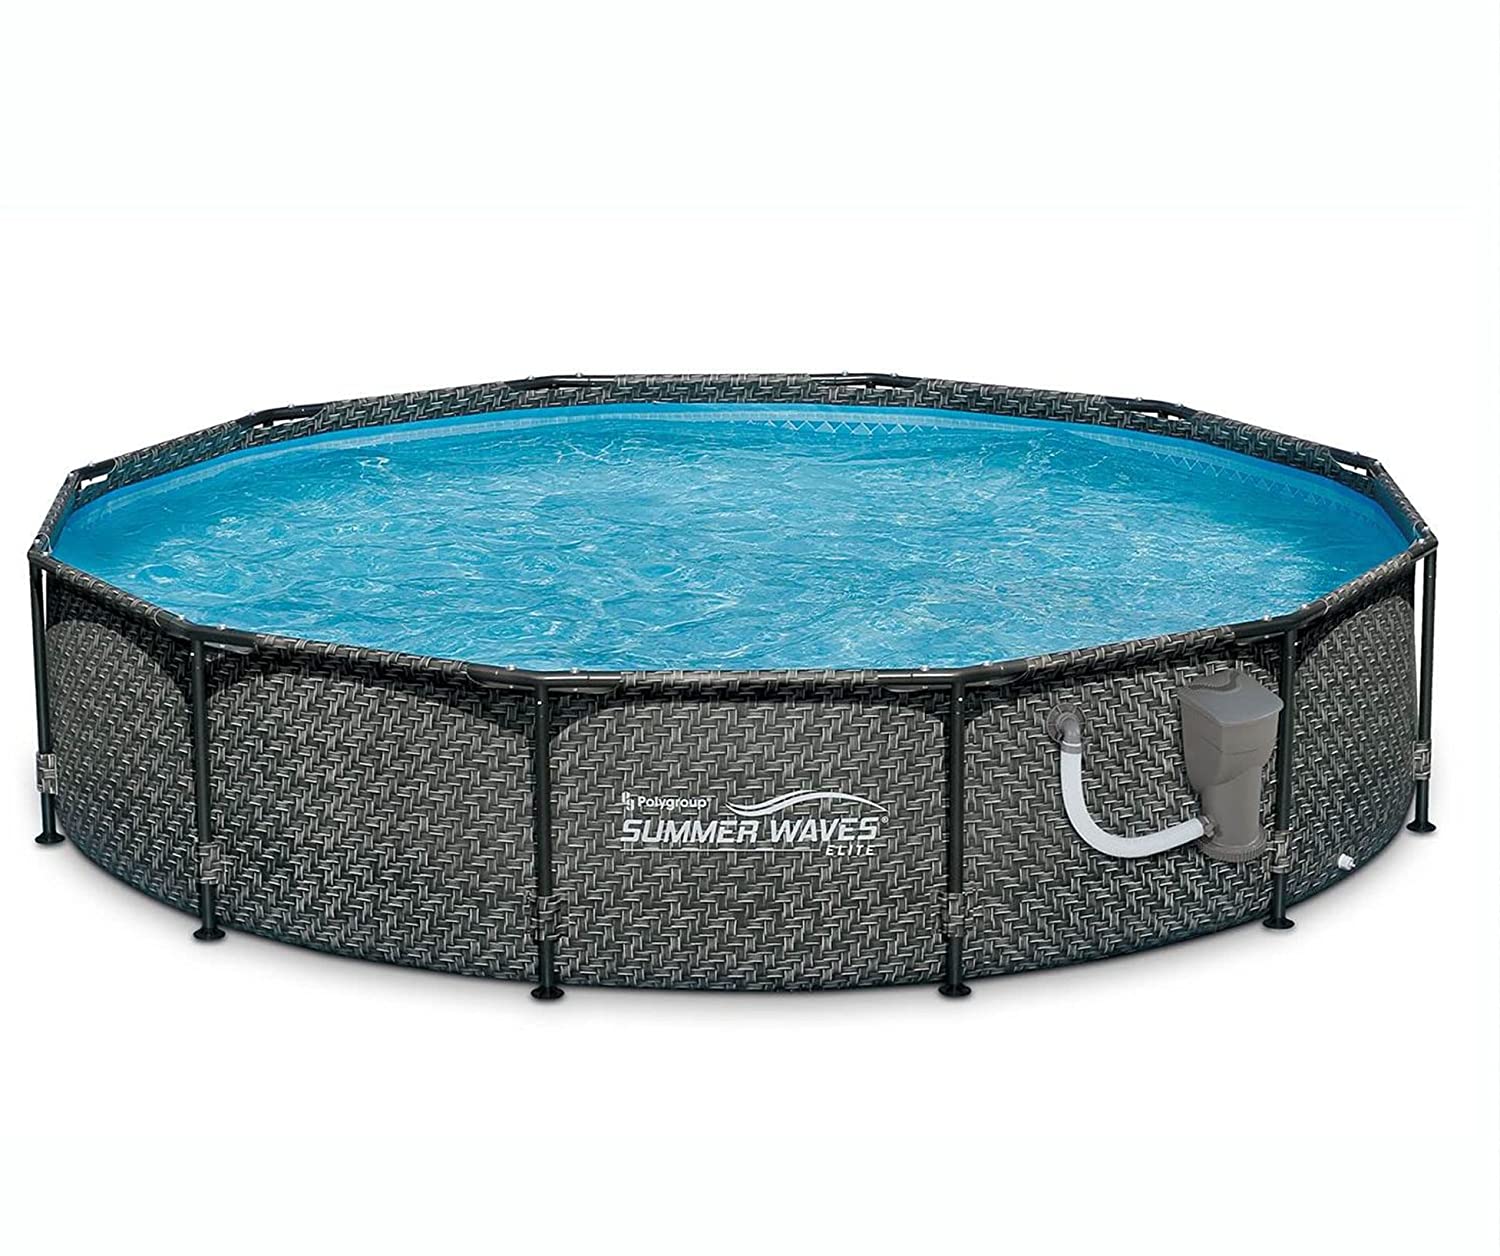 Summer Waves Outdoor Round Frame Above Ground Swimming Pool Set 